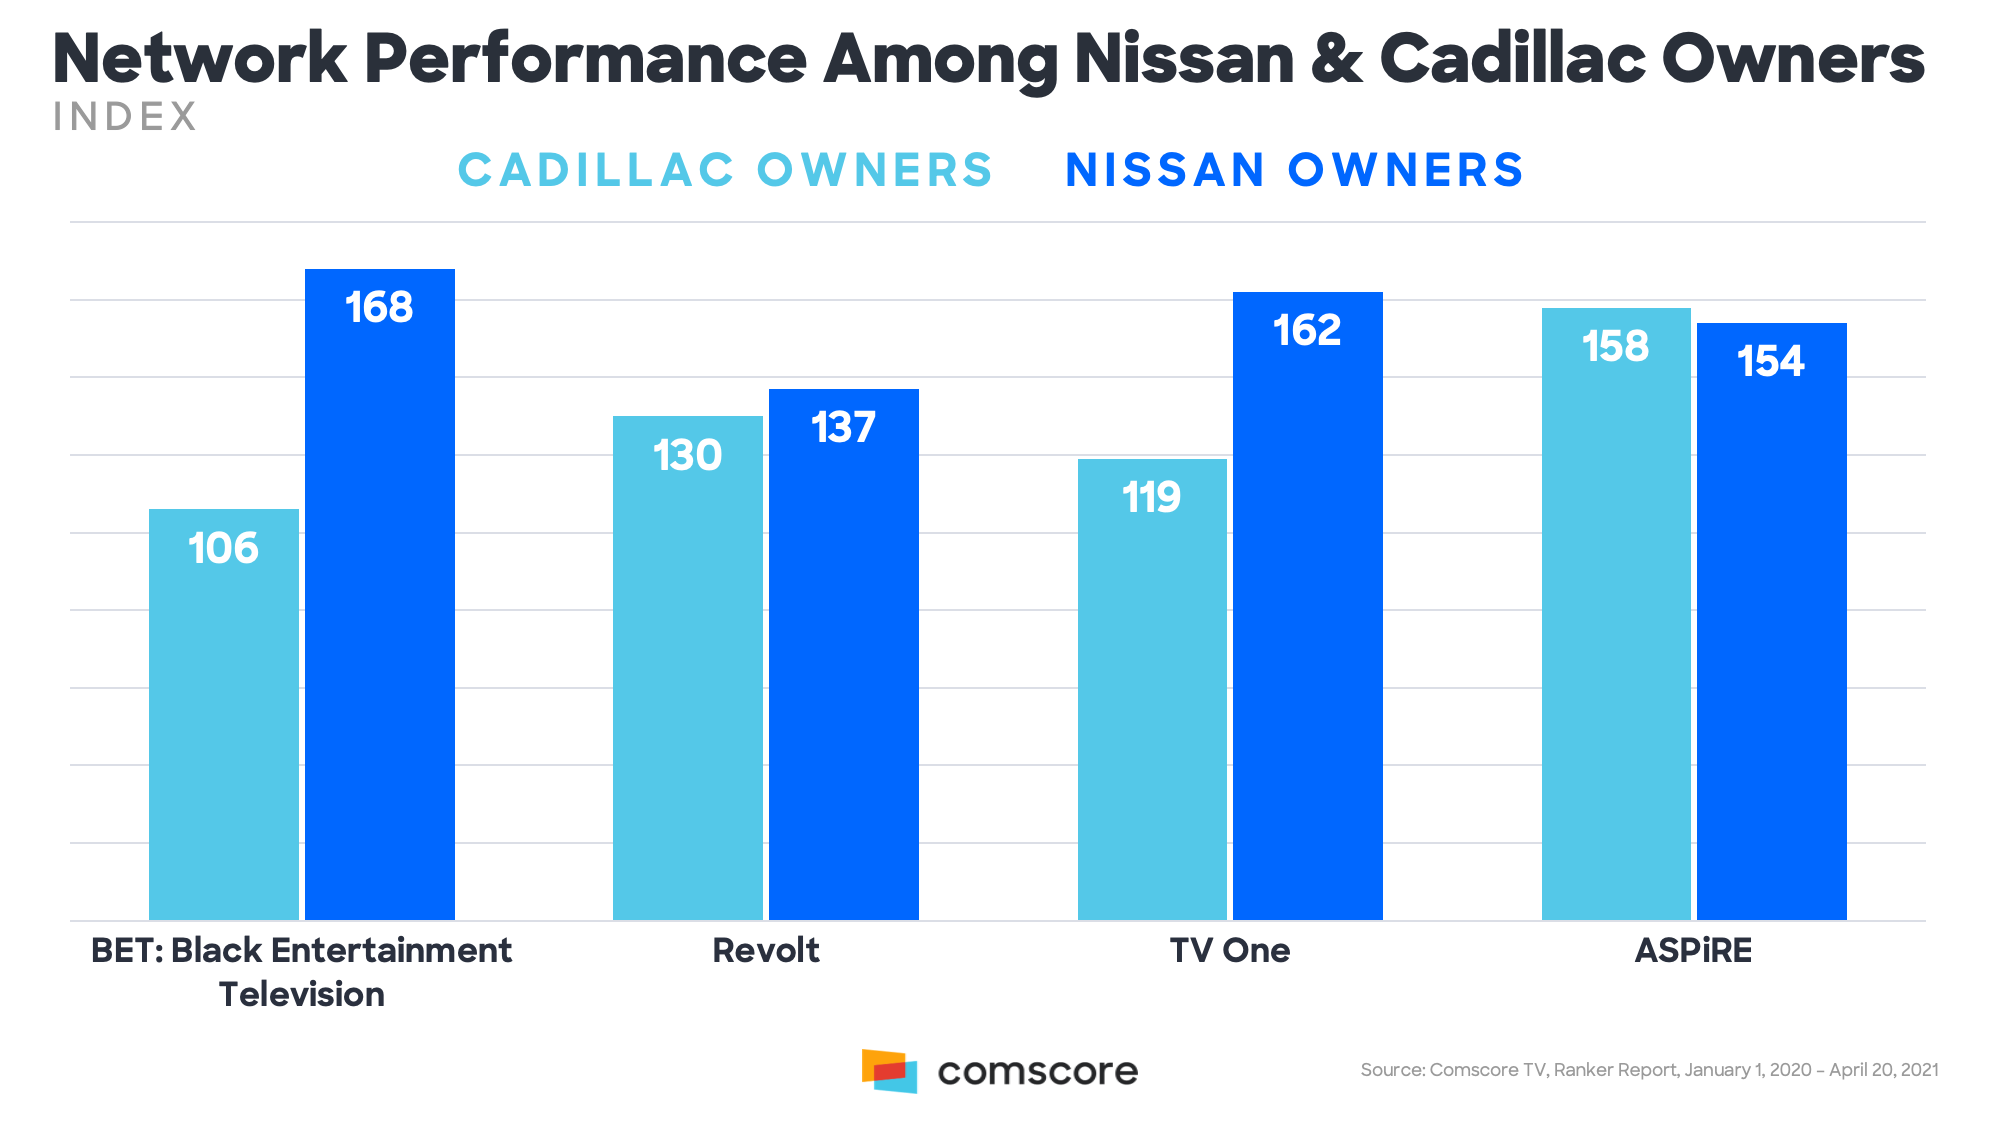 Network Performance Among Nissan and Cadillac Owners